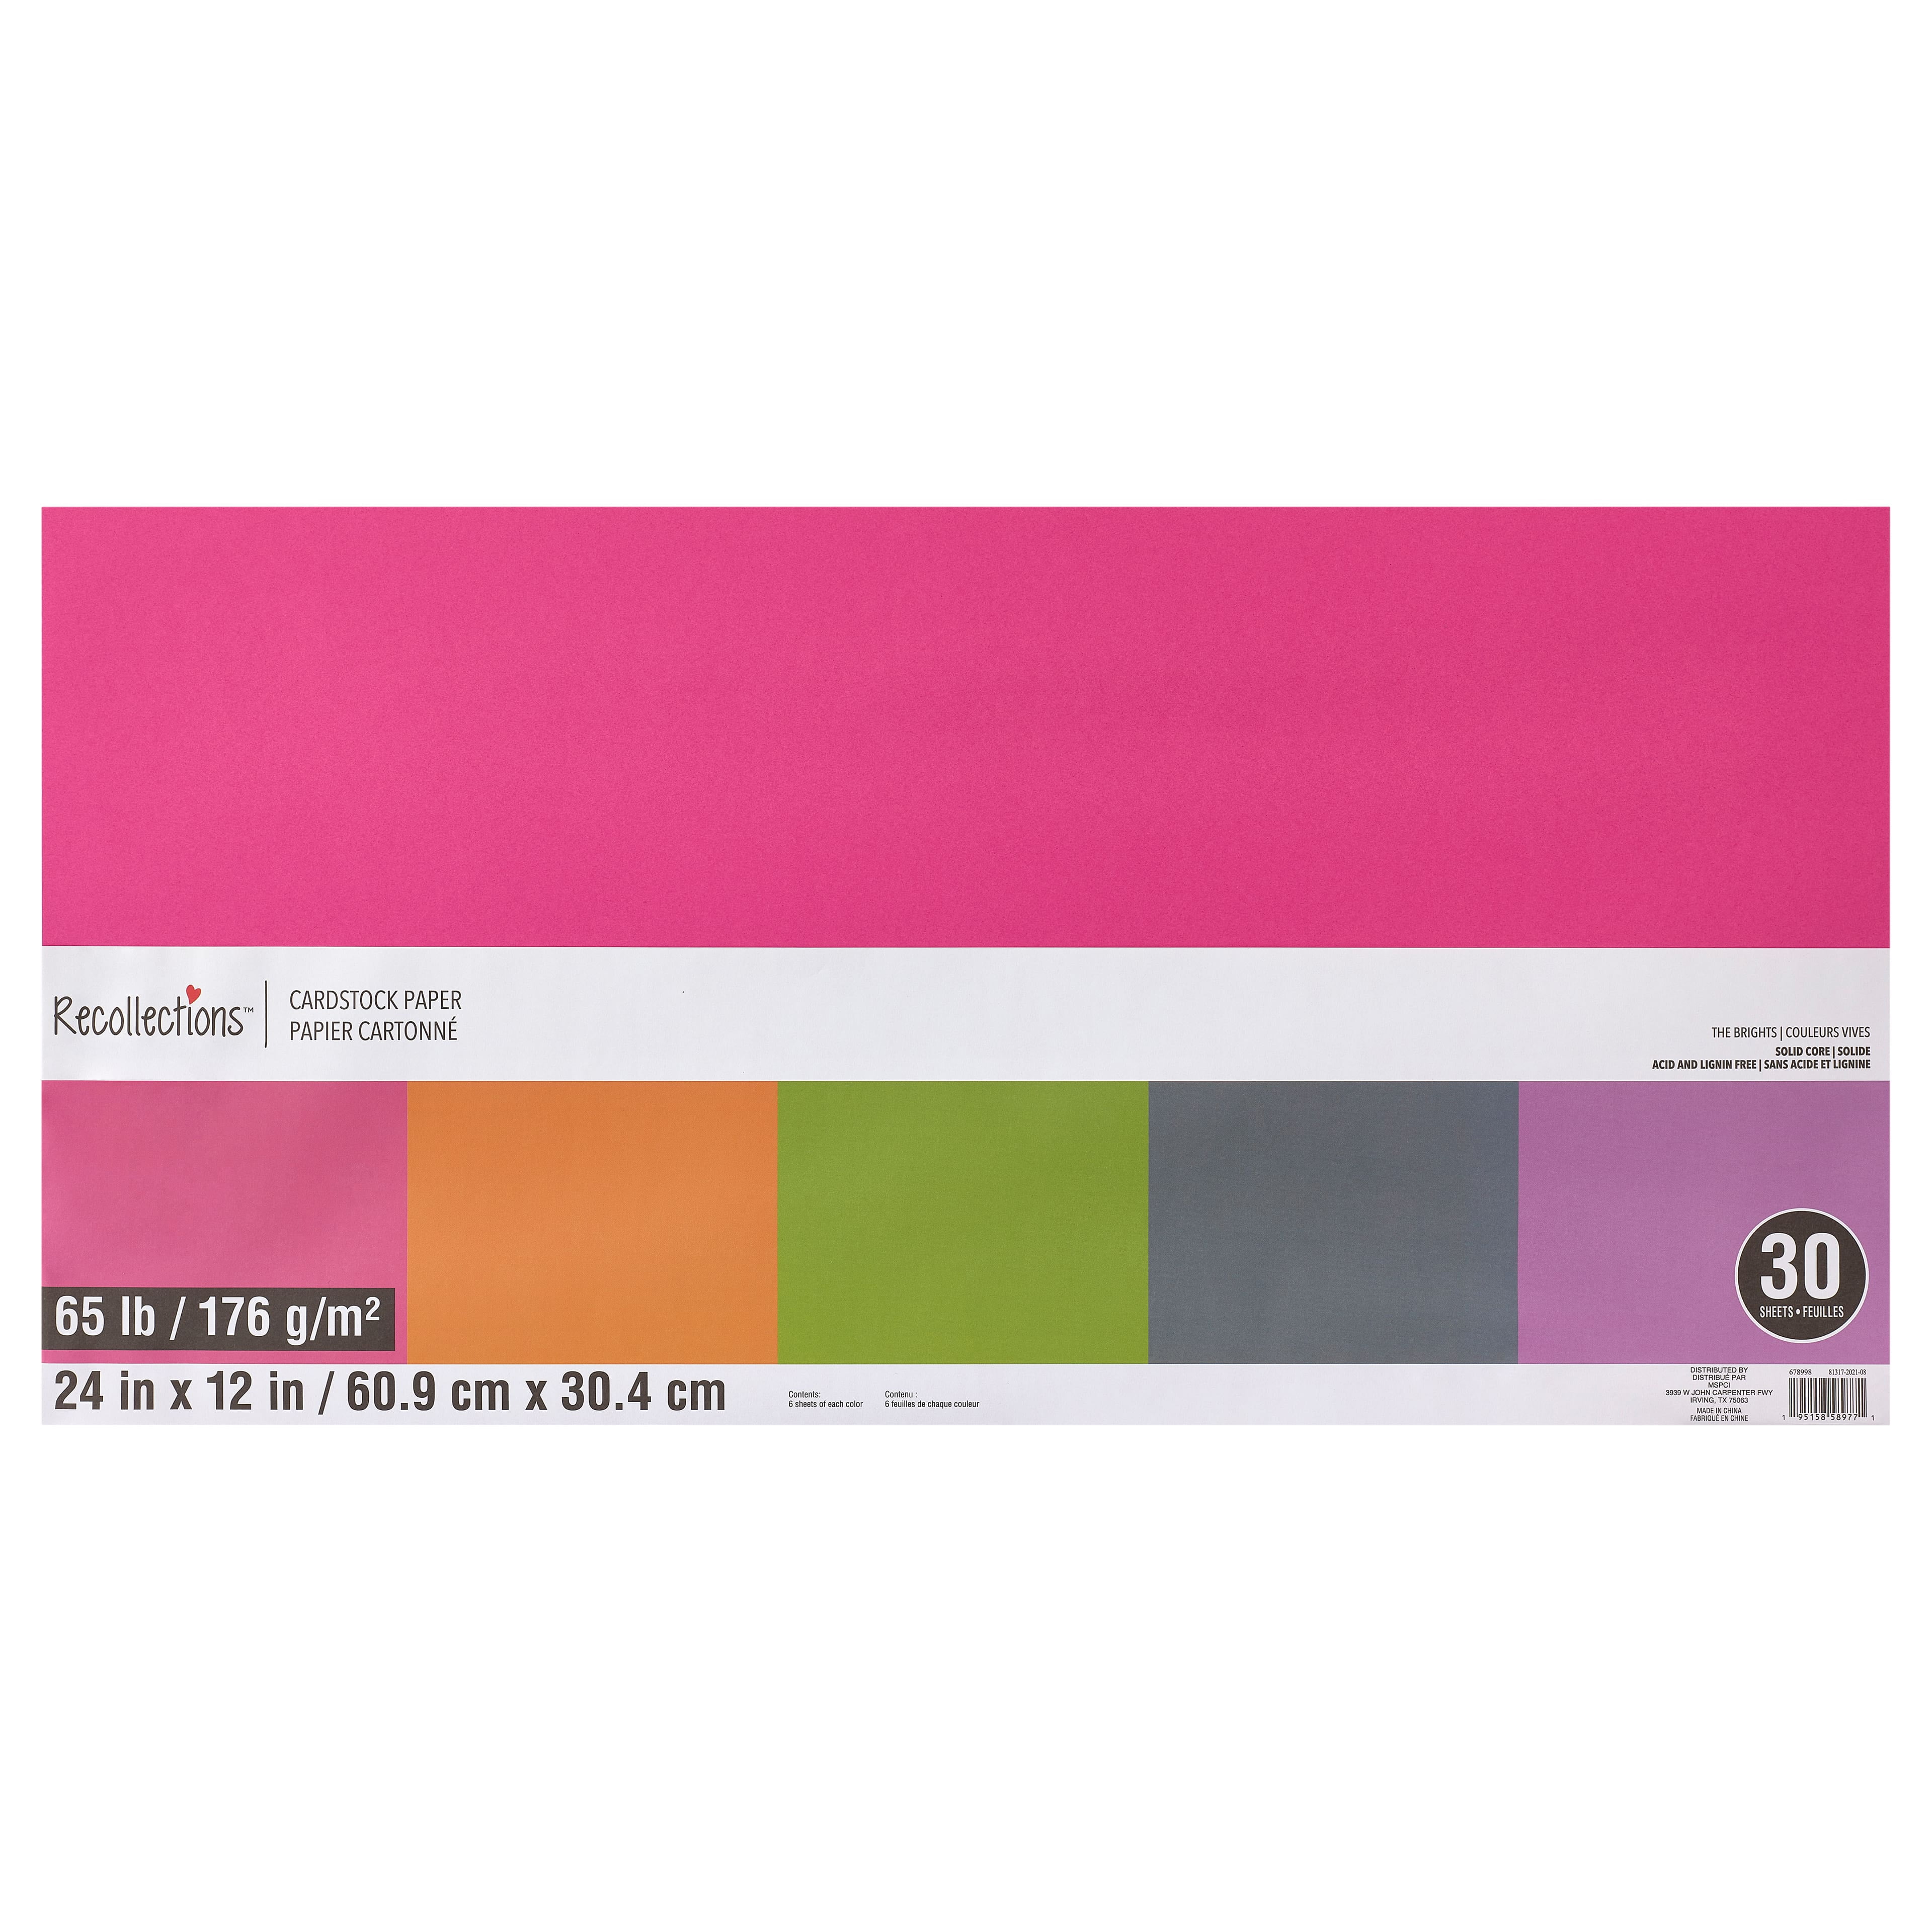 Bright 12 x 24 Cardstock Paper by Recollections™, 30 Sheets